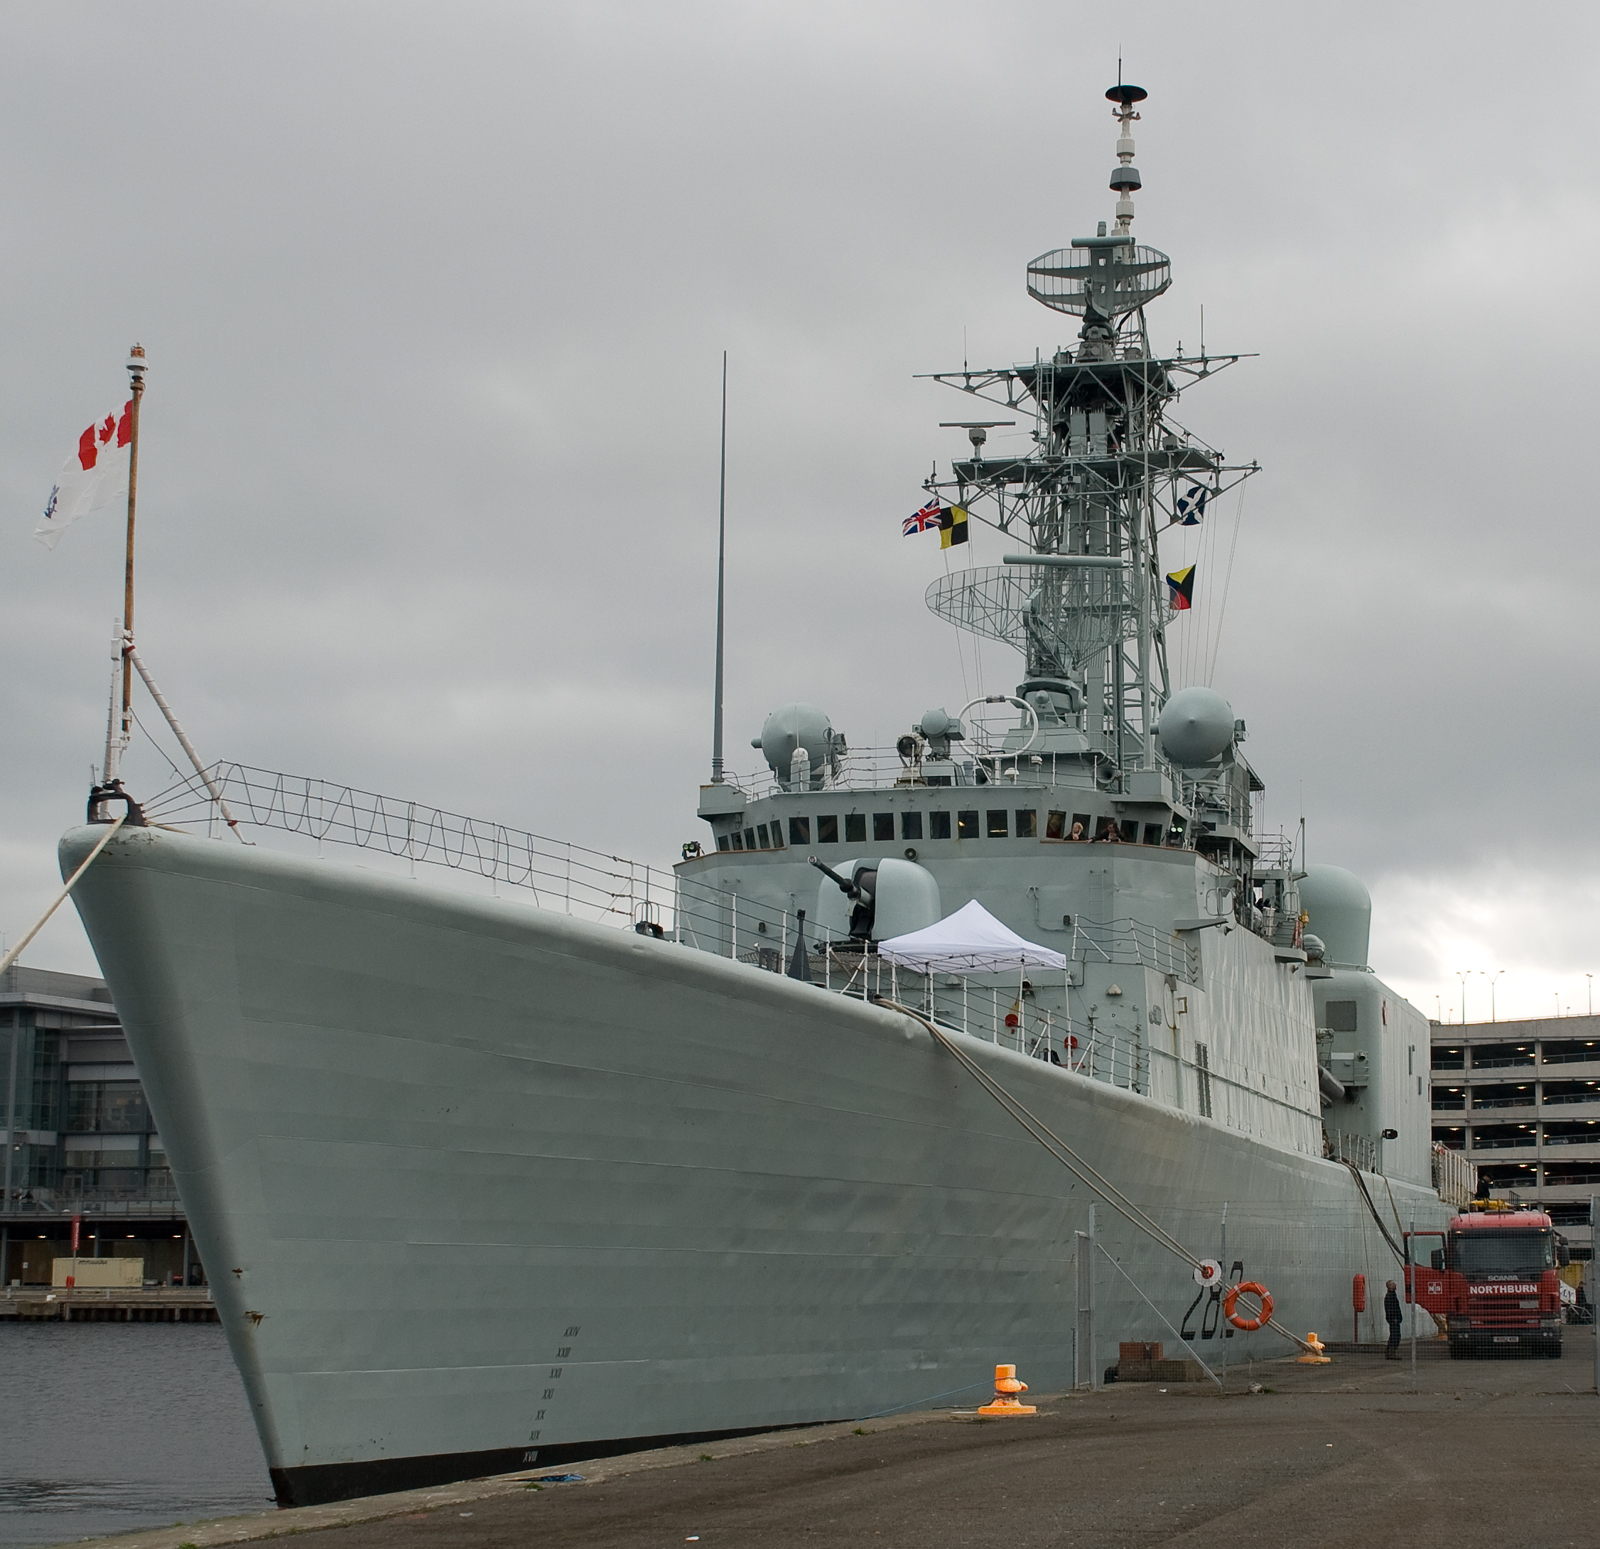 HMCS_Athabaskan_%28DDH_282%29_as_seen_from_land.jpg